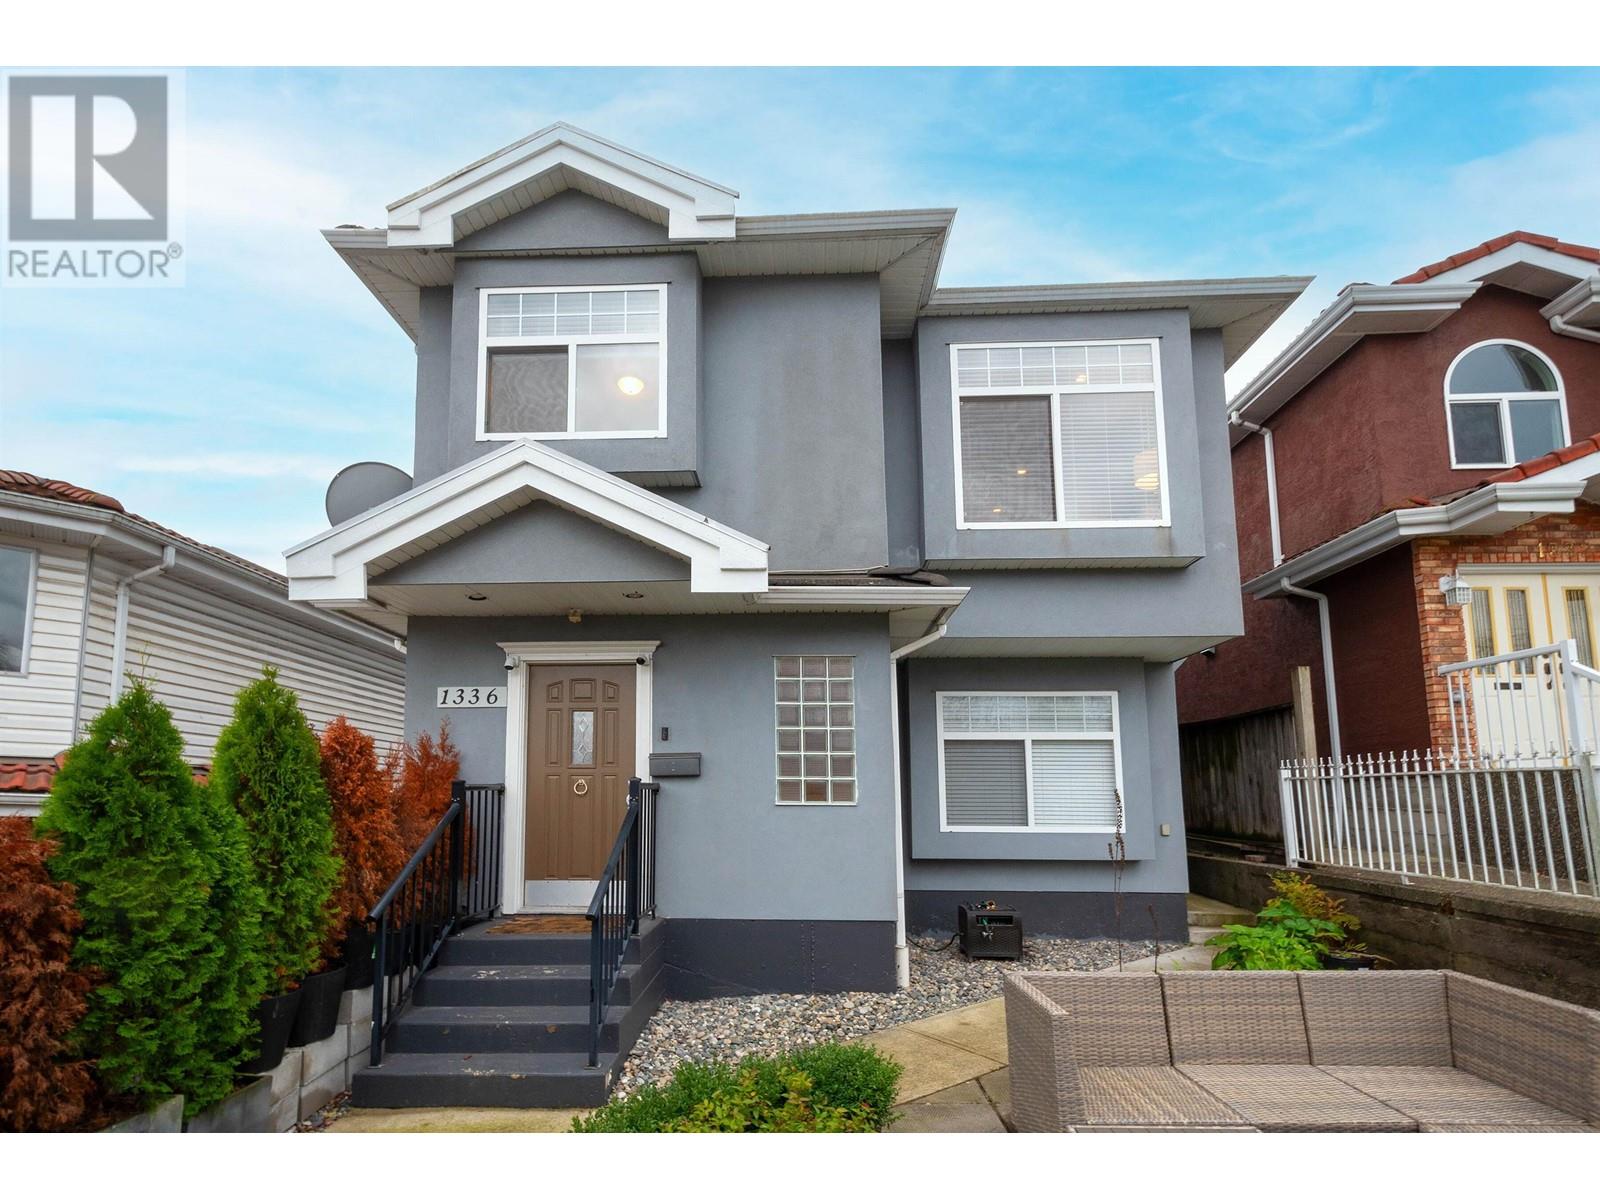 Listing Picture 16 of 18 : 1336 E 16TH AVENUE, Vancouver / 溫哥華 - 魯藝地產 Yvonne Lu Group - MLS Medallion Club Member